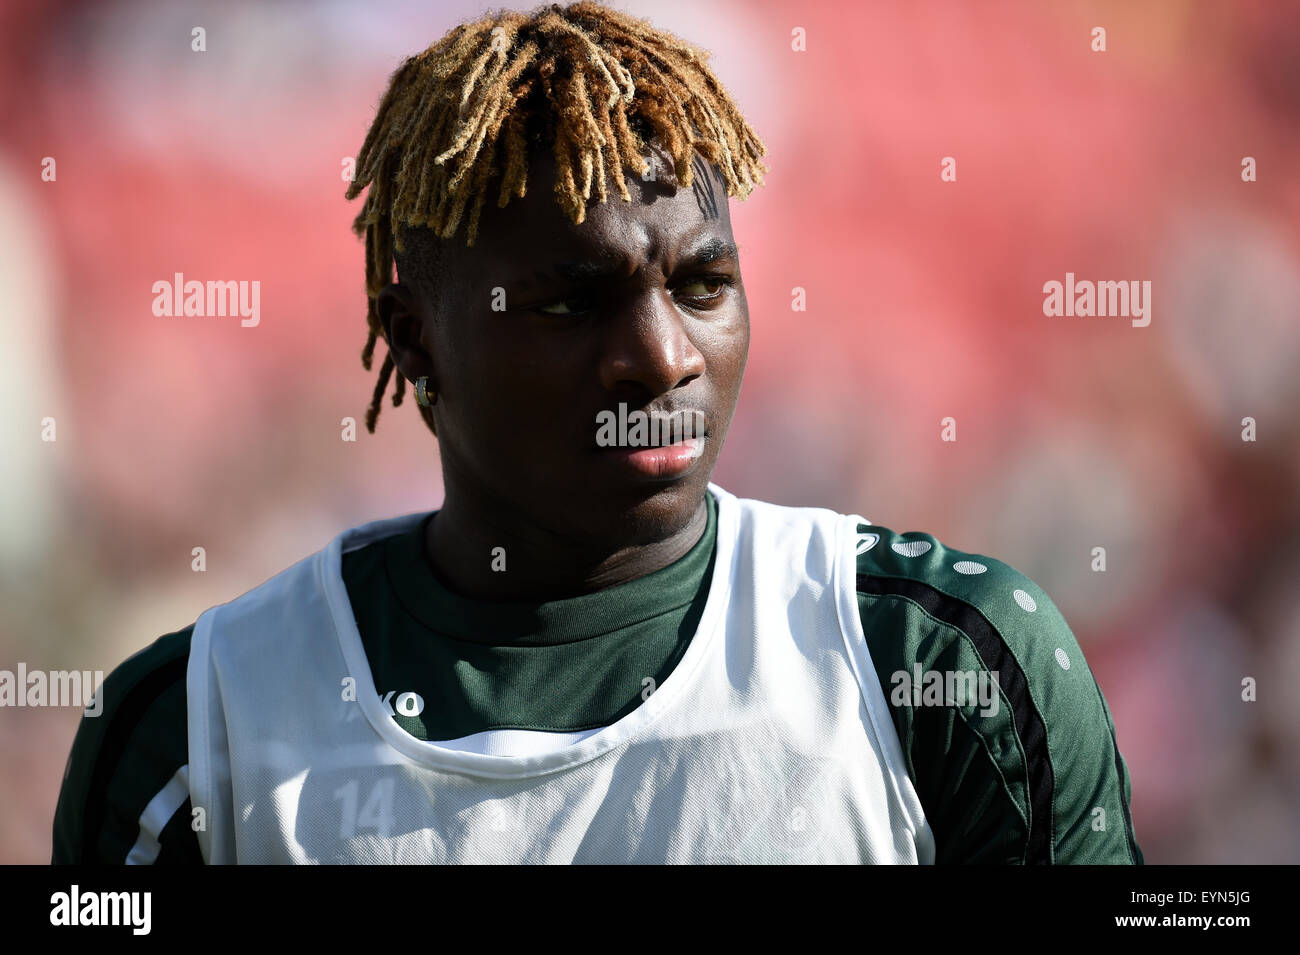 Hannover's Allan Saint-Maximin pictured before the soccer friendly between Hannover 96 and AFC Sunderland at the HDI-Arena in Hannover, Germany, 1 August 2015. PHOTO: ALEXANDER KOERNER//dpa Stock Photo